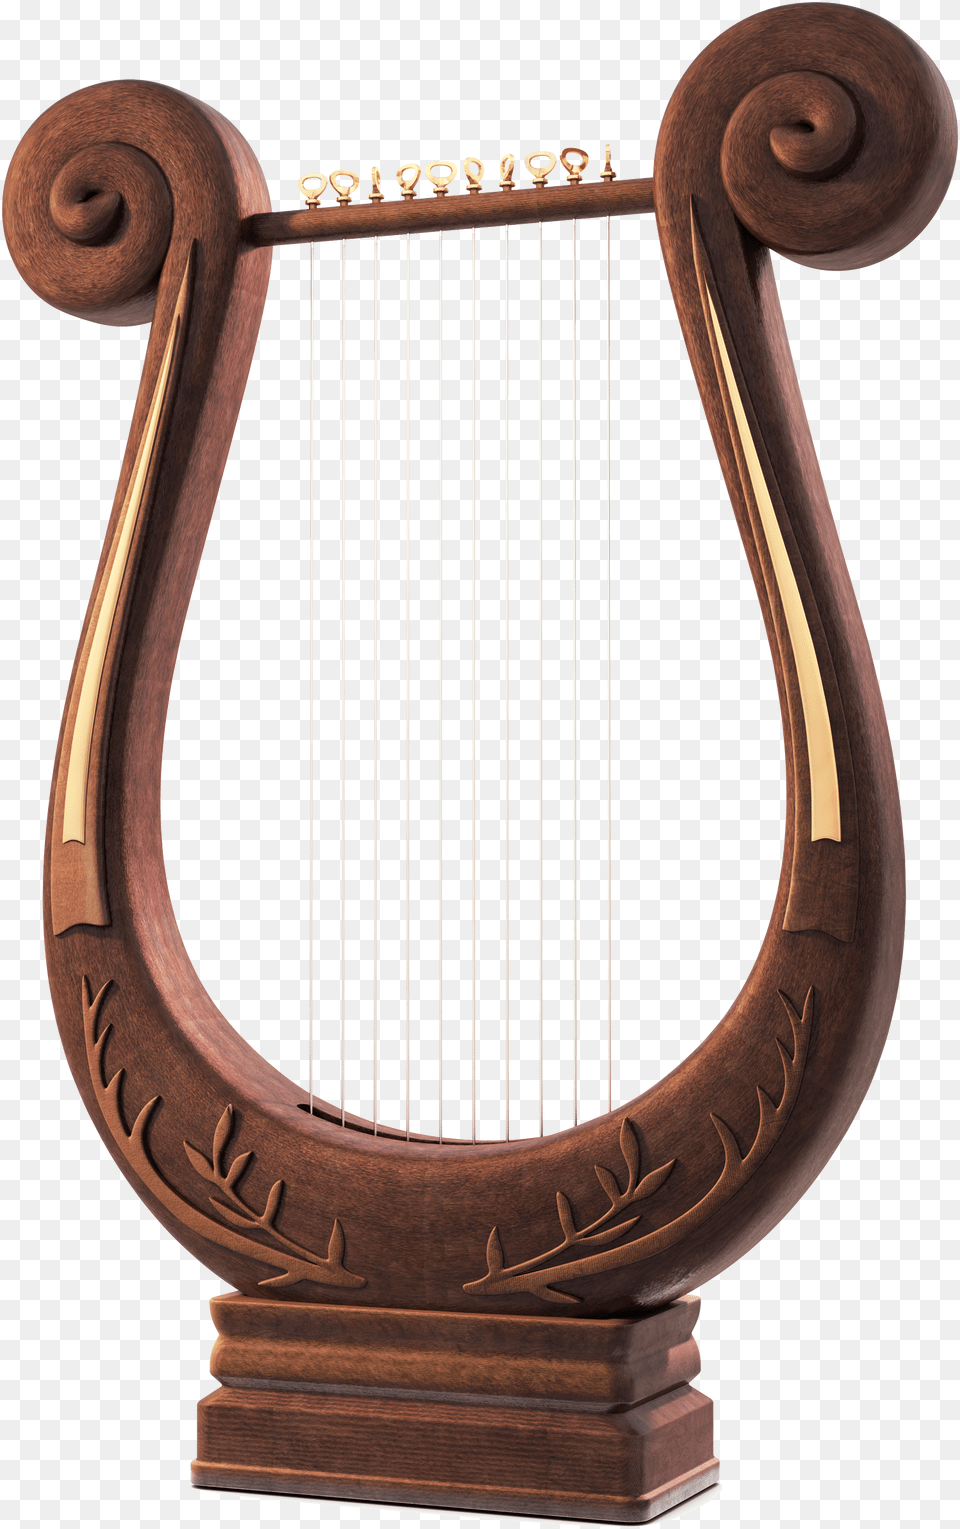 Harp, Musical Instrument, Lyre Png